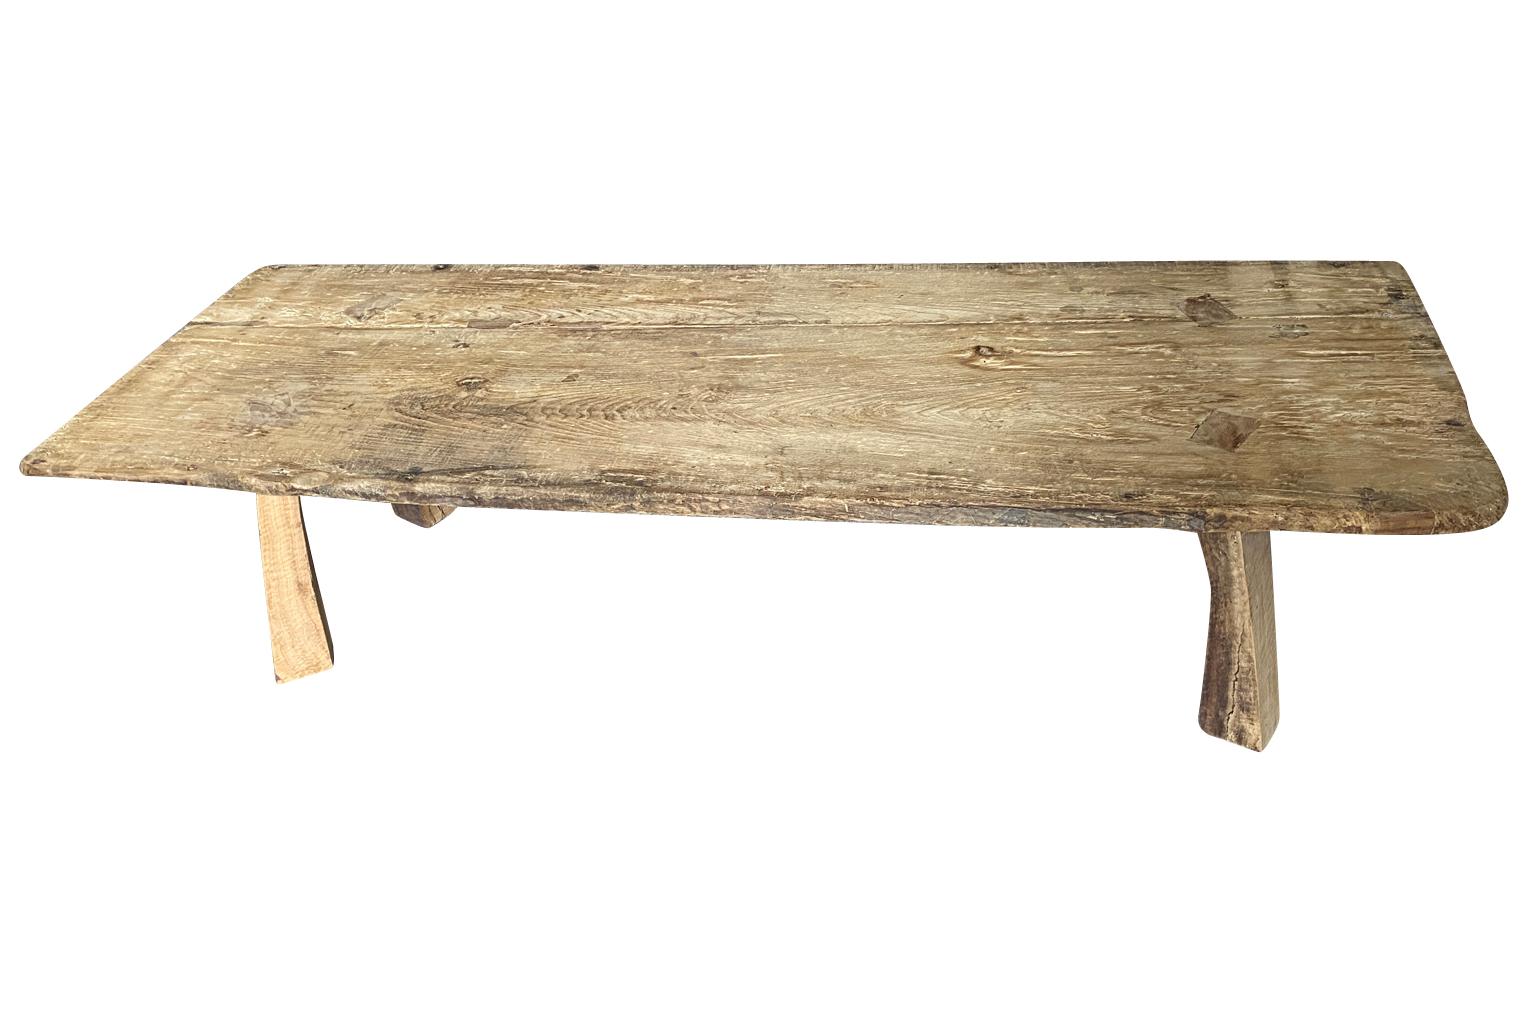 A terrific Table Basse - Coffee Table from the Catalan region of Spain.  Soundly constructed from from beautiful chestnut with a solid board top.  Wonderful patina and graining.